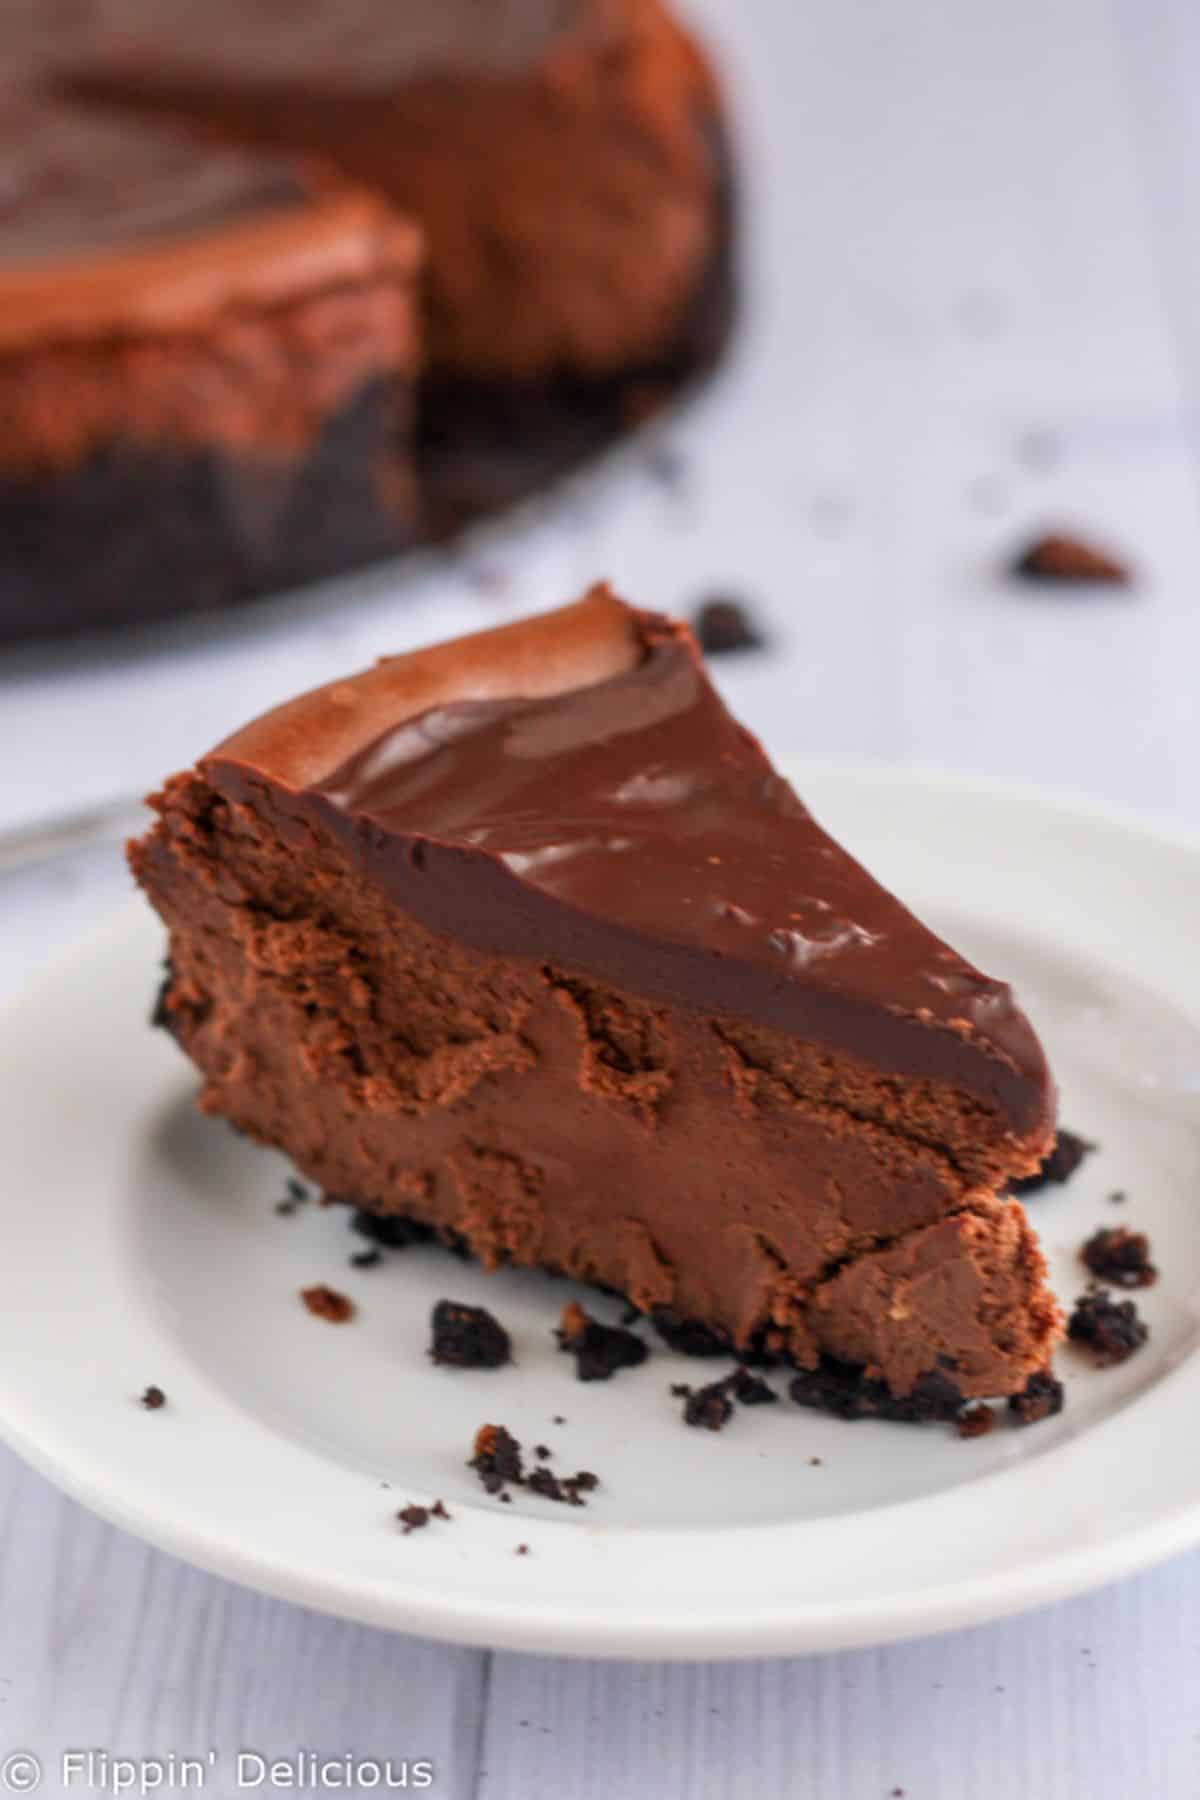 A piece of delicious Gluten-Free Chocolate Cheesecake on a white plate.